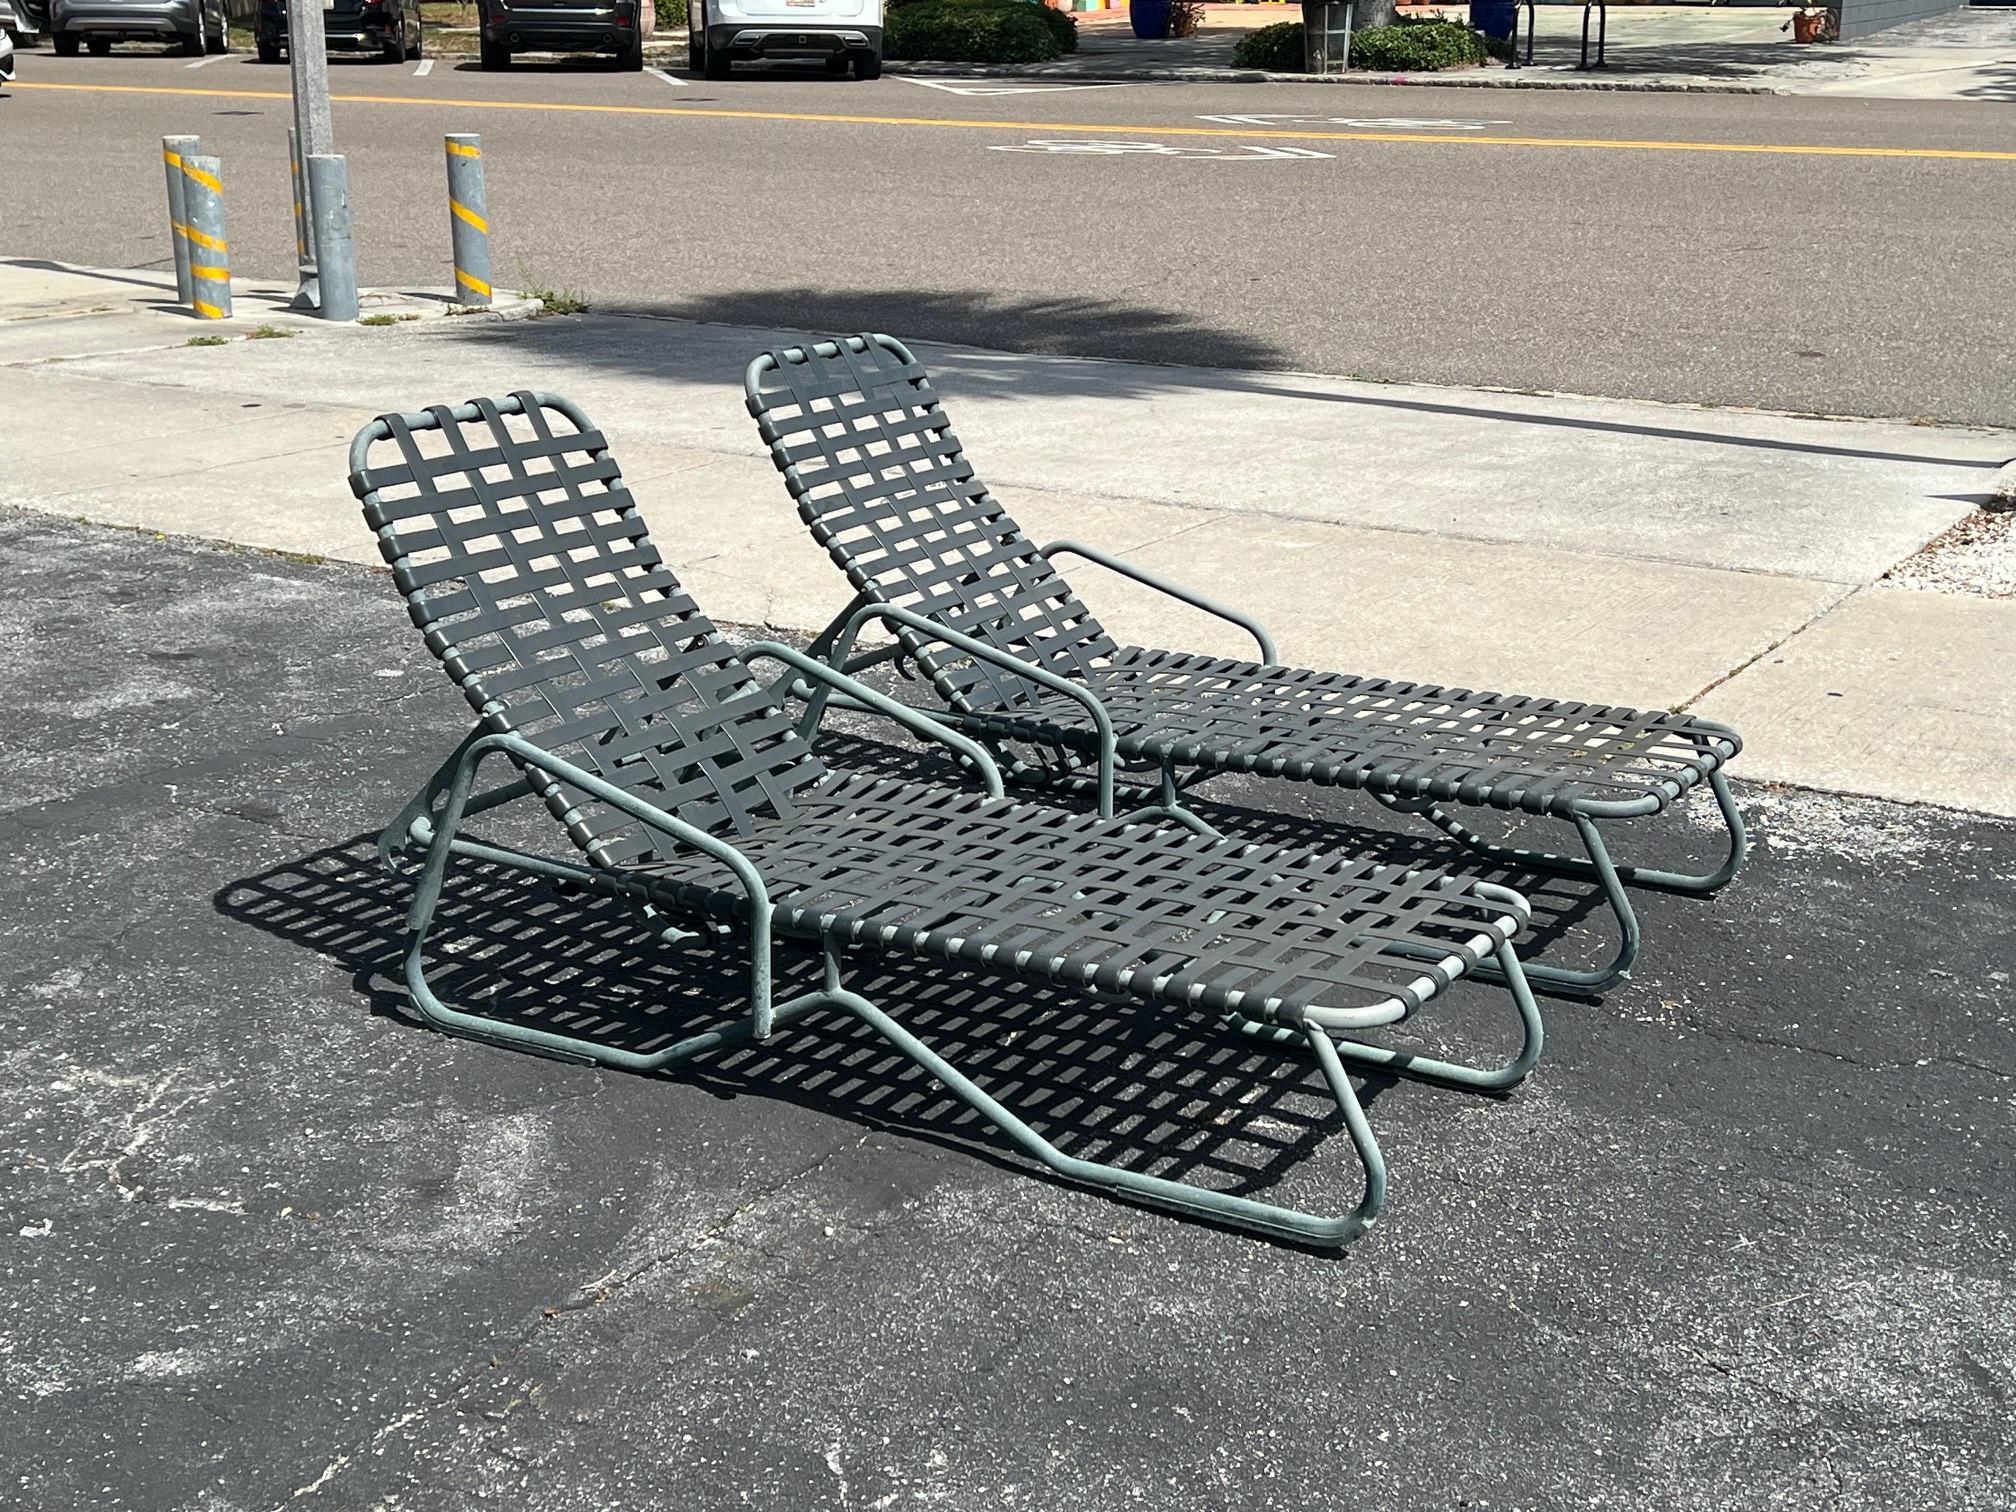 A great outdoor/pool side vintage chaises. Heavy aluminium construction, three position seat adjustments. Also note flat, welded gliders on the bottom for better support. Black/gray straps in good condition, no breaks. Measuring 26